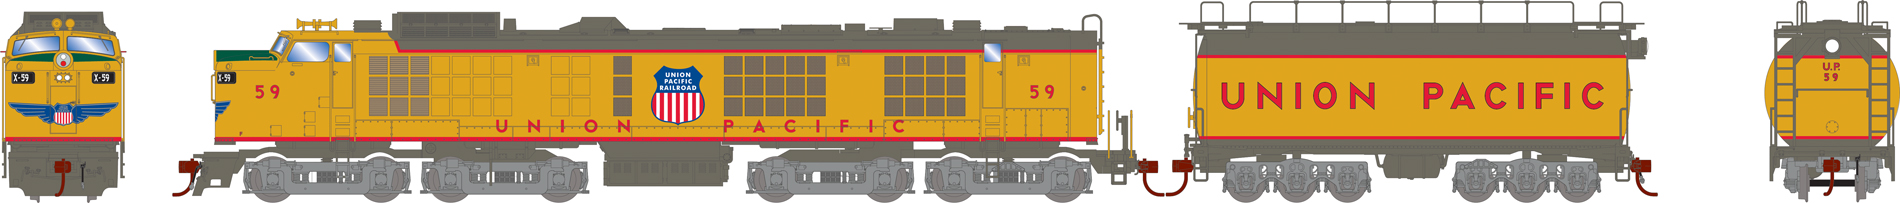 News & Products for the week of March 27th 2023: an image of a model locomotive